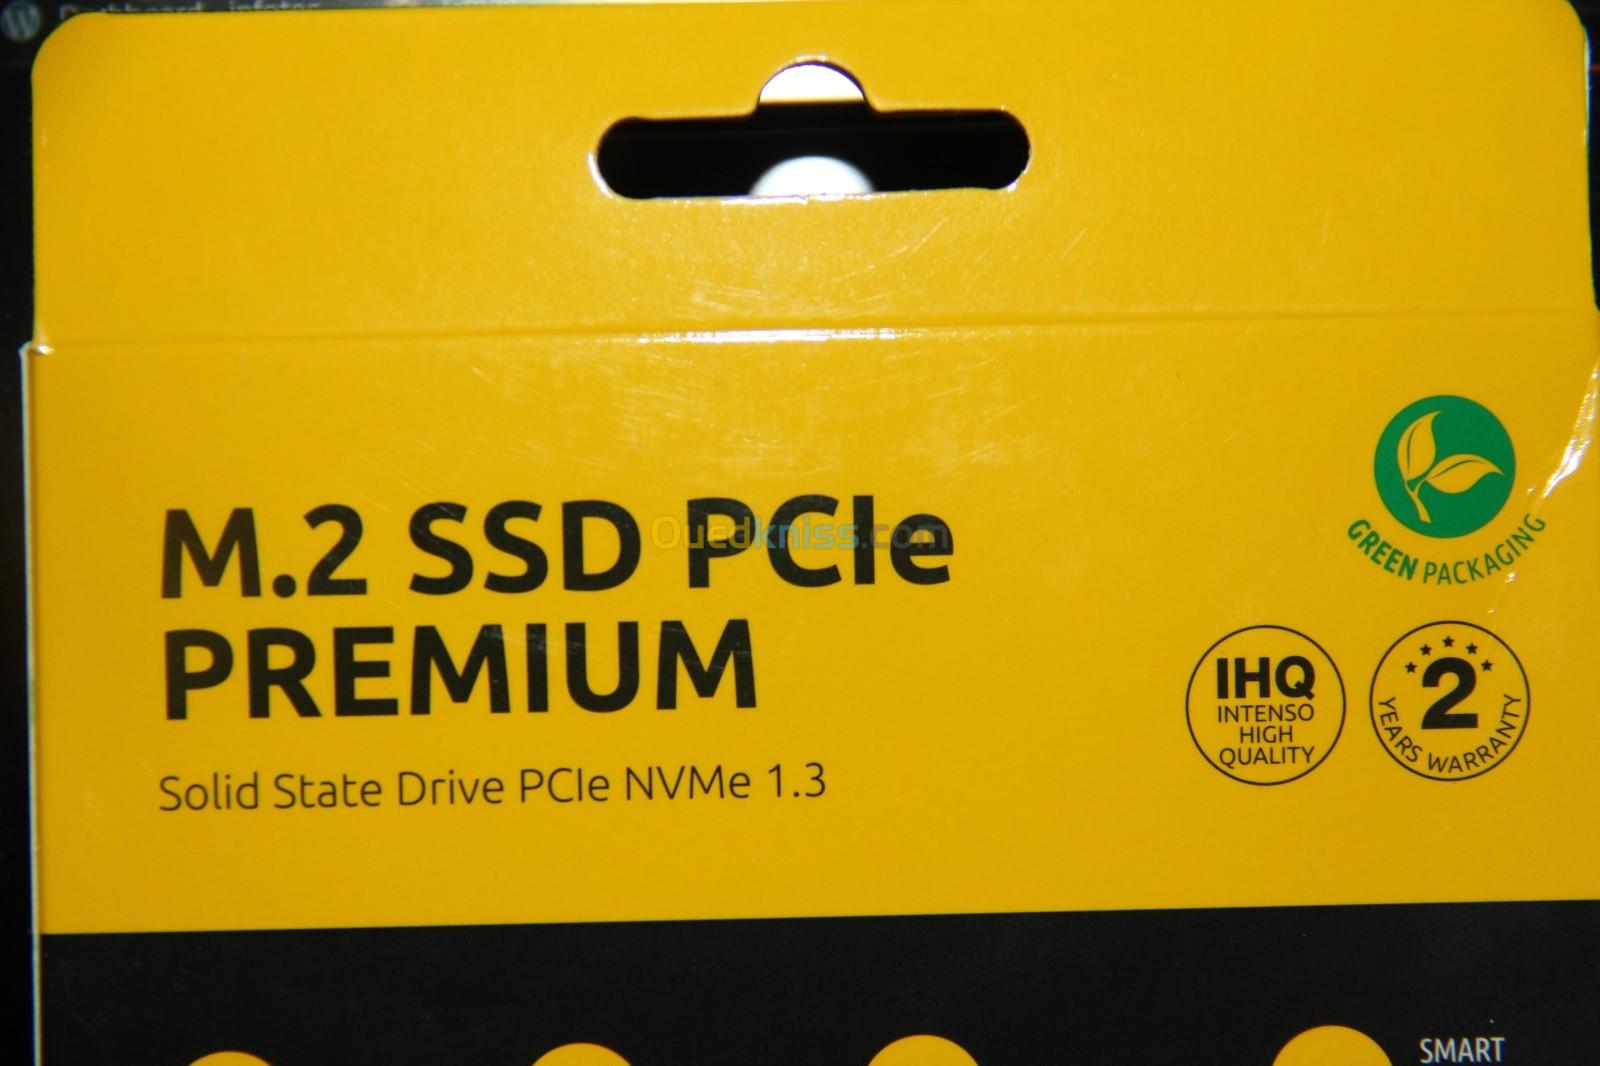 ssd M.2 premium / 1TB Solid State Drive PCIe NVMe 1.3 